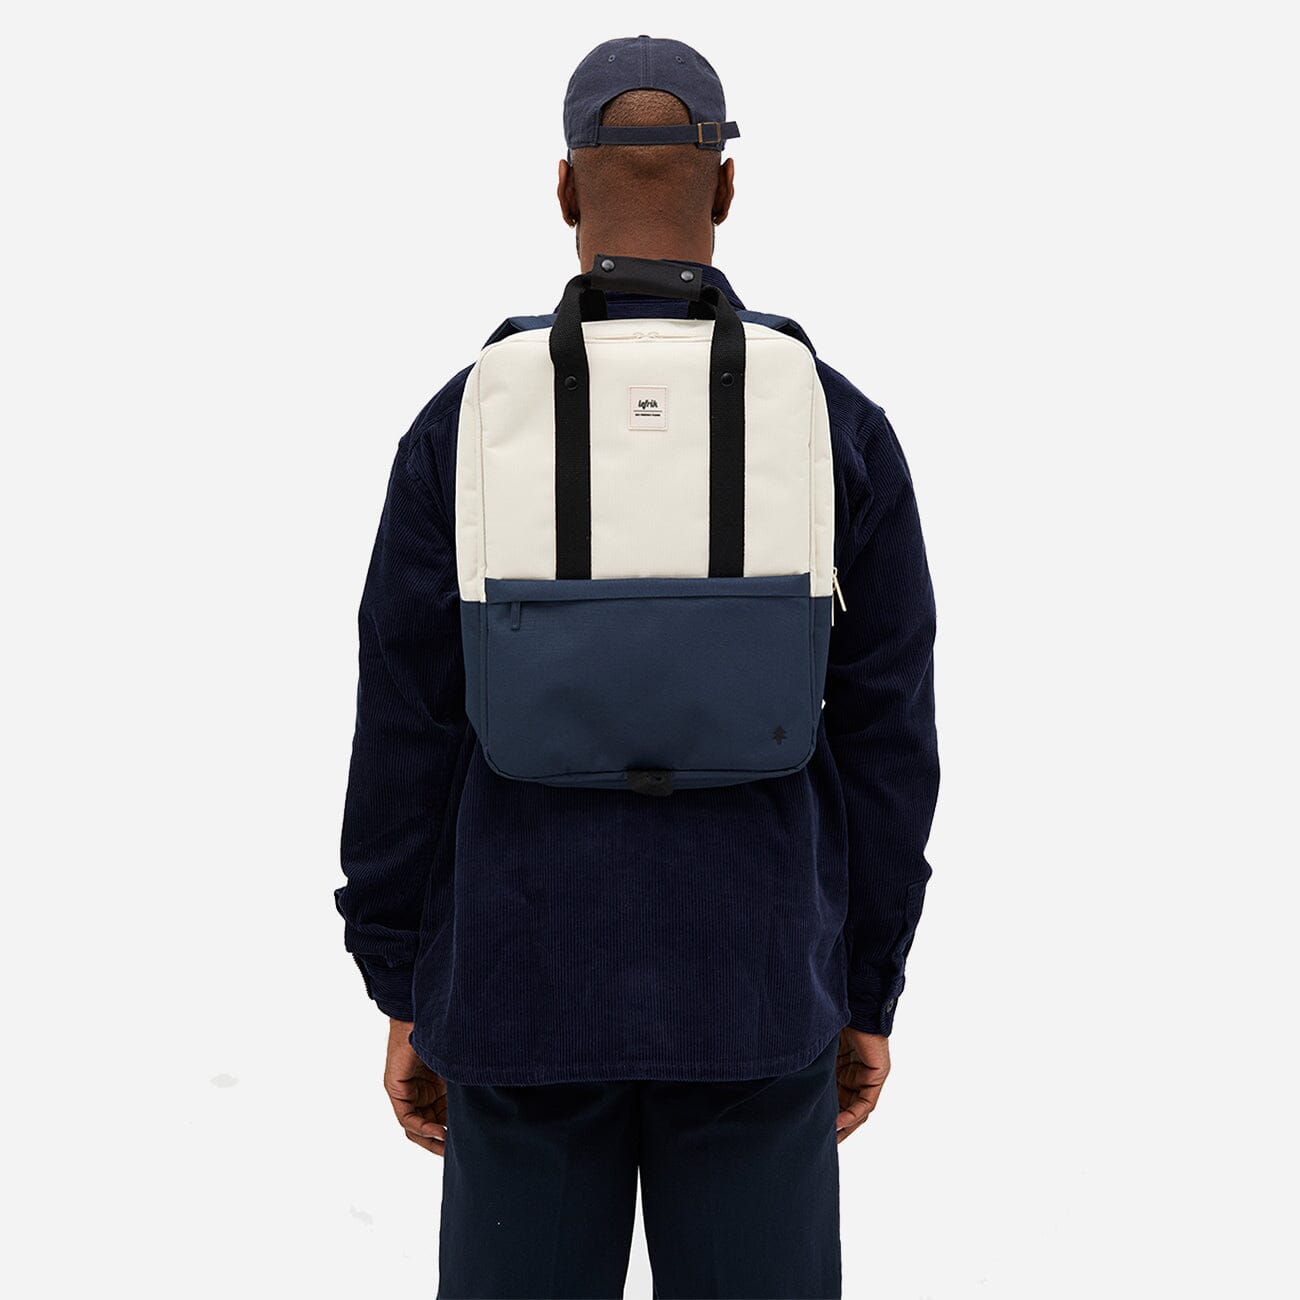 Back view of man wearing an environmentally friendly blue and white daypack